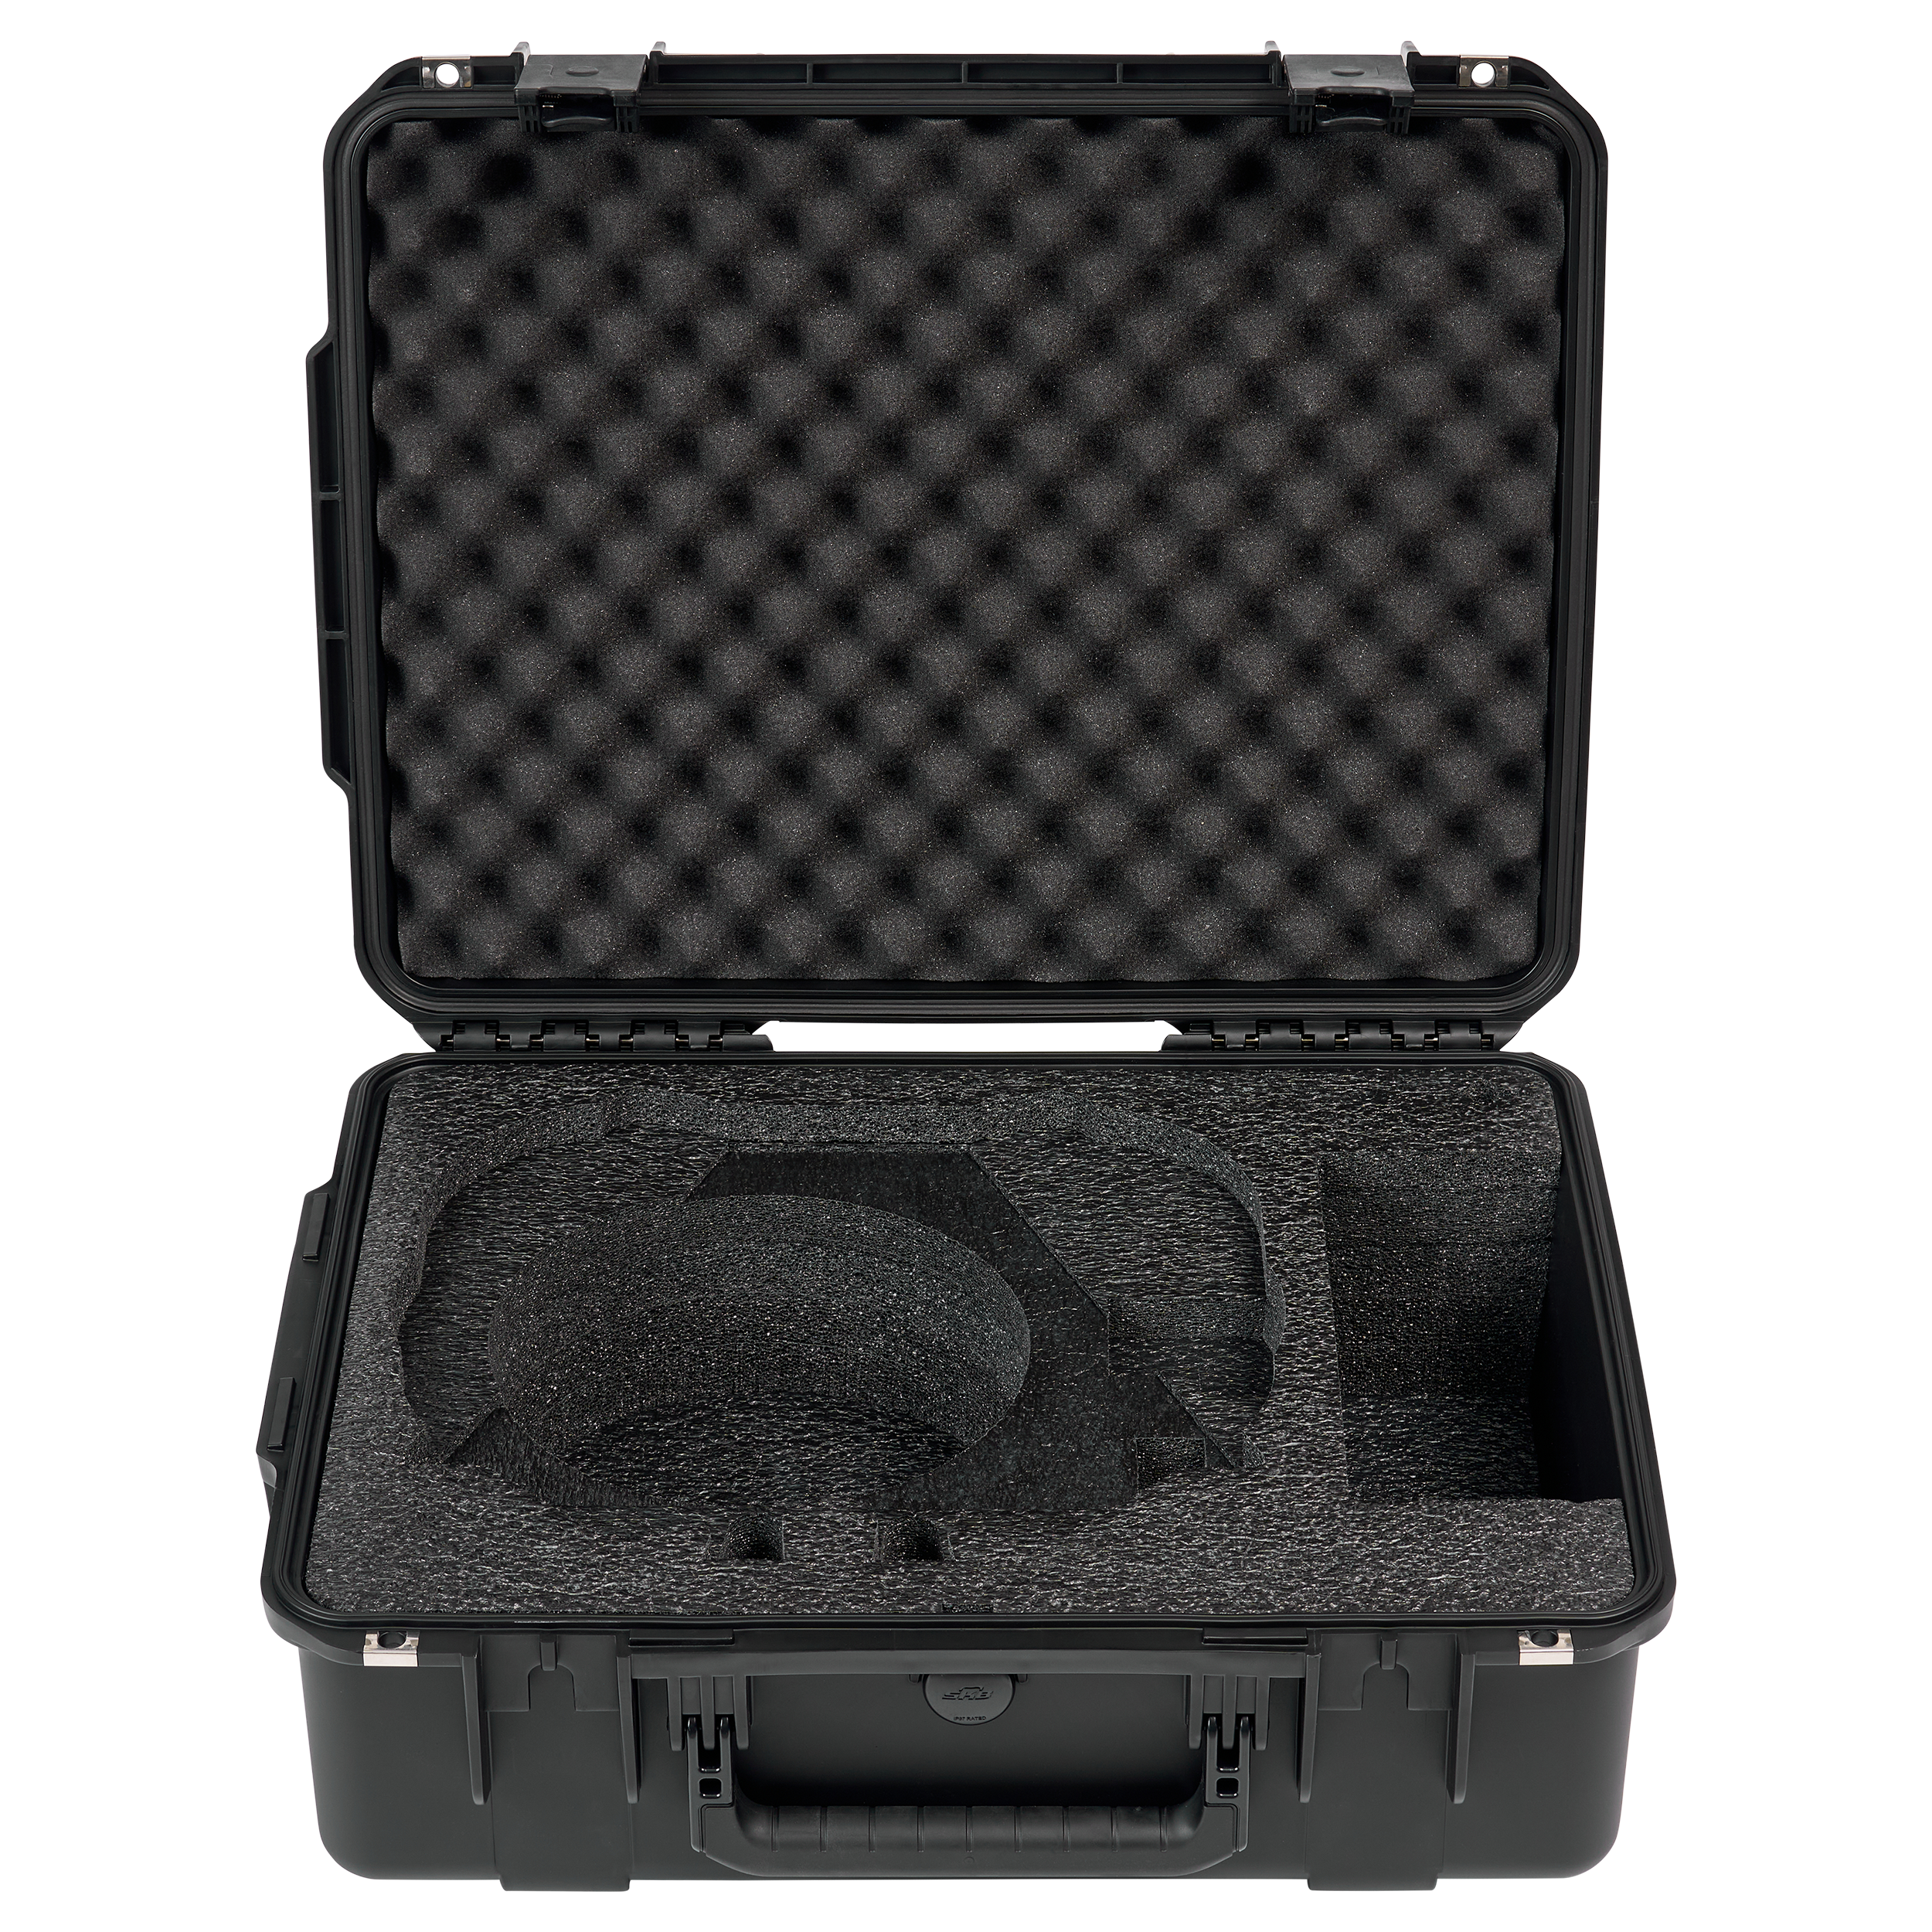 BYFP ipCase for 2x Shure Wideband Antennas